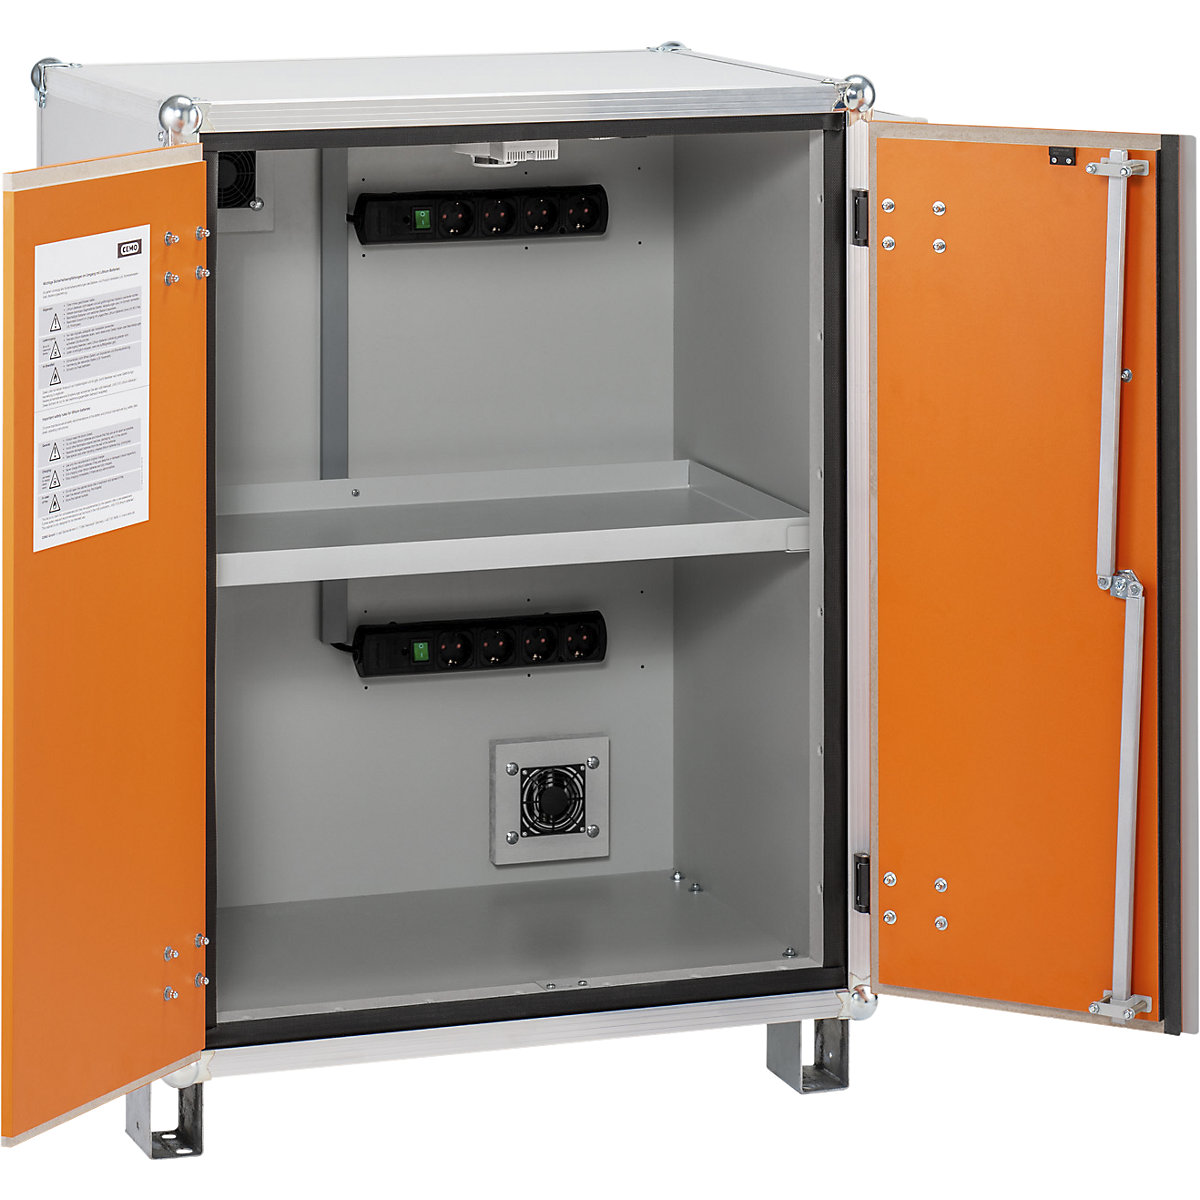 PREMIUM PLUS safety battery charging cabinet - CEMO